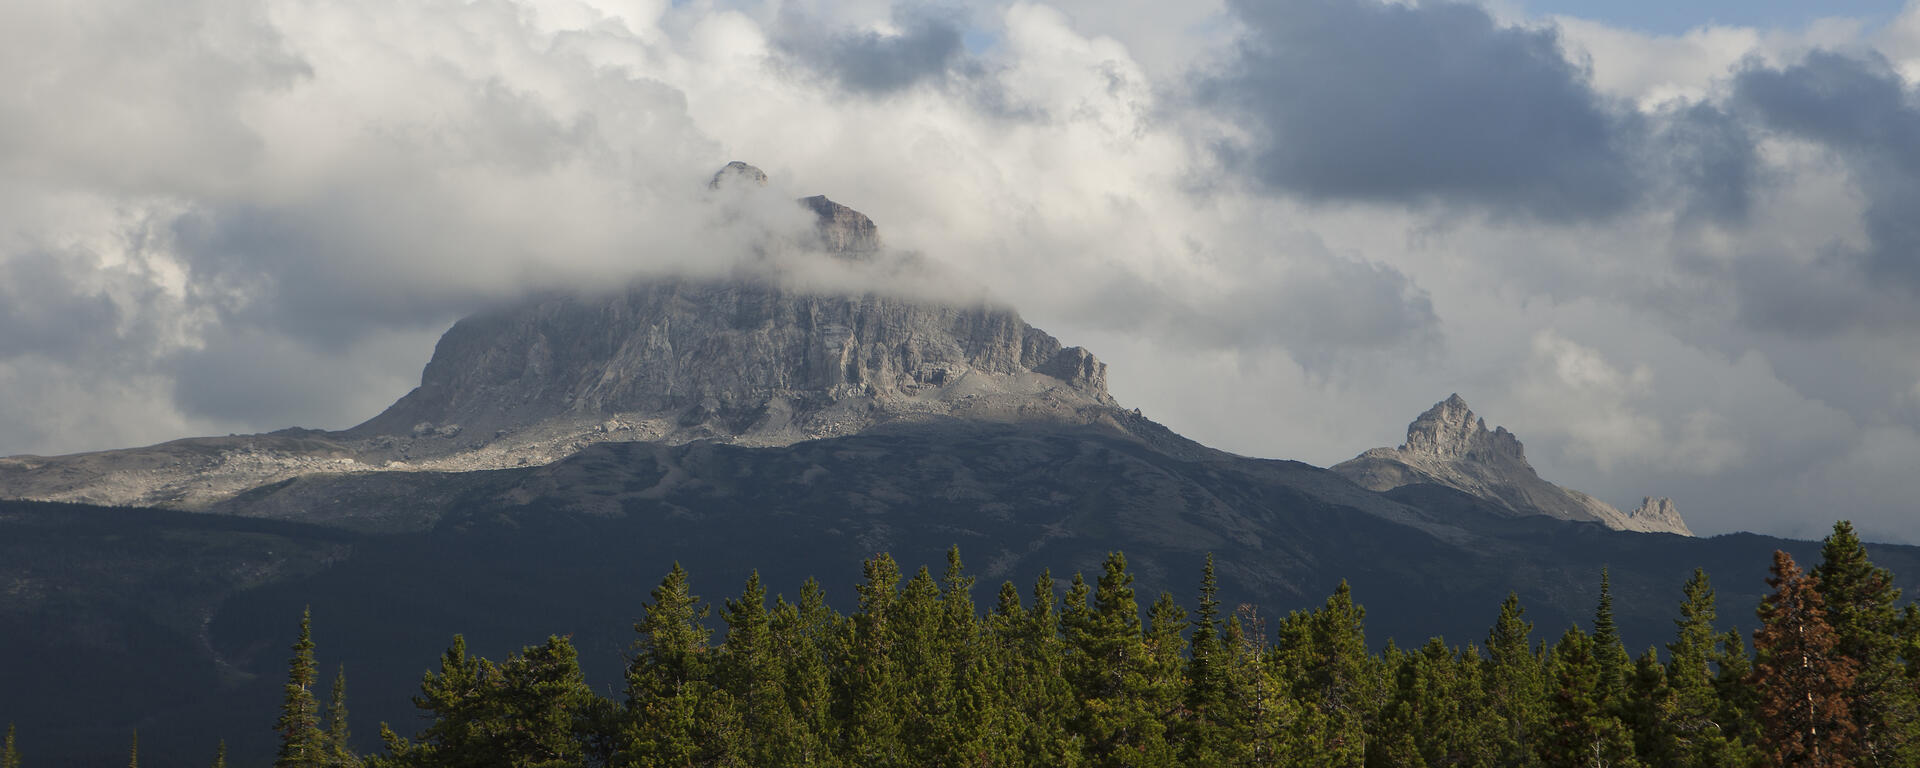 A scenic view. There are puffy clouds in the sky, billowing over a mountain peak in the background. There are pine trees on the lower third of the landscape image